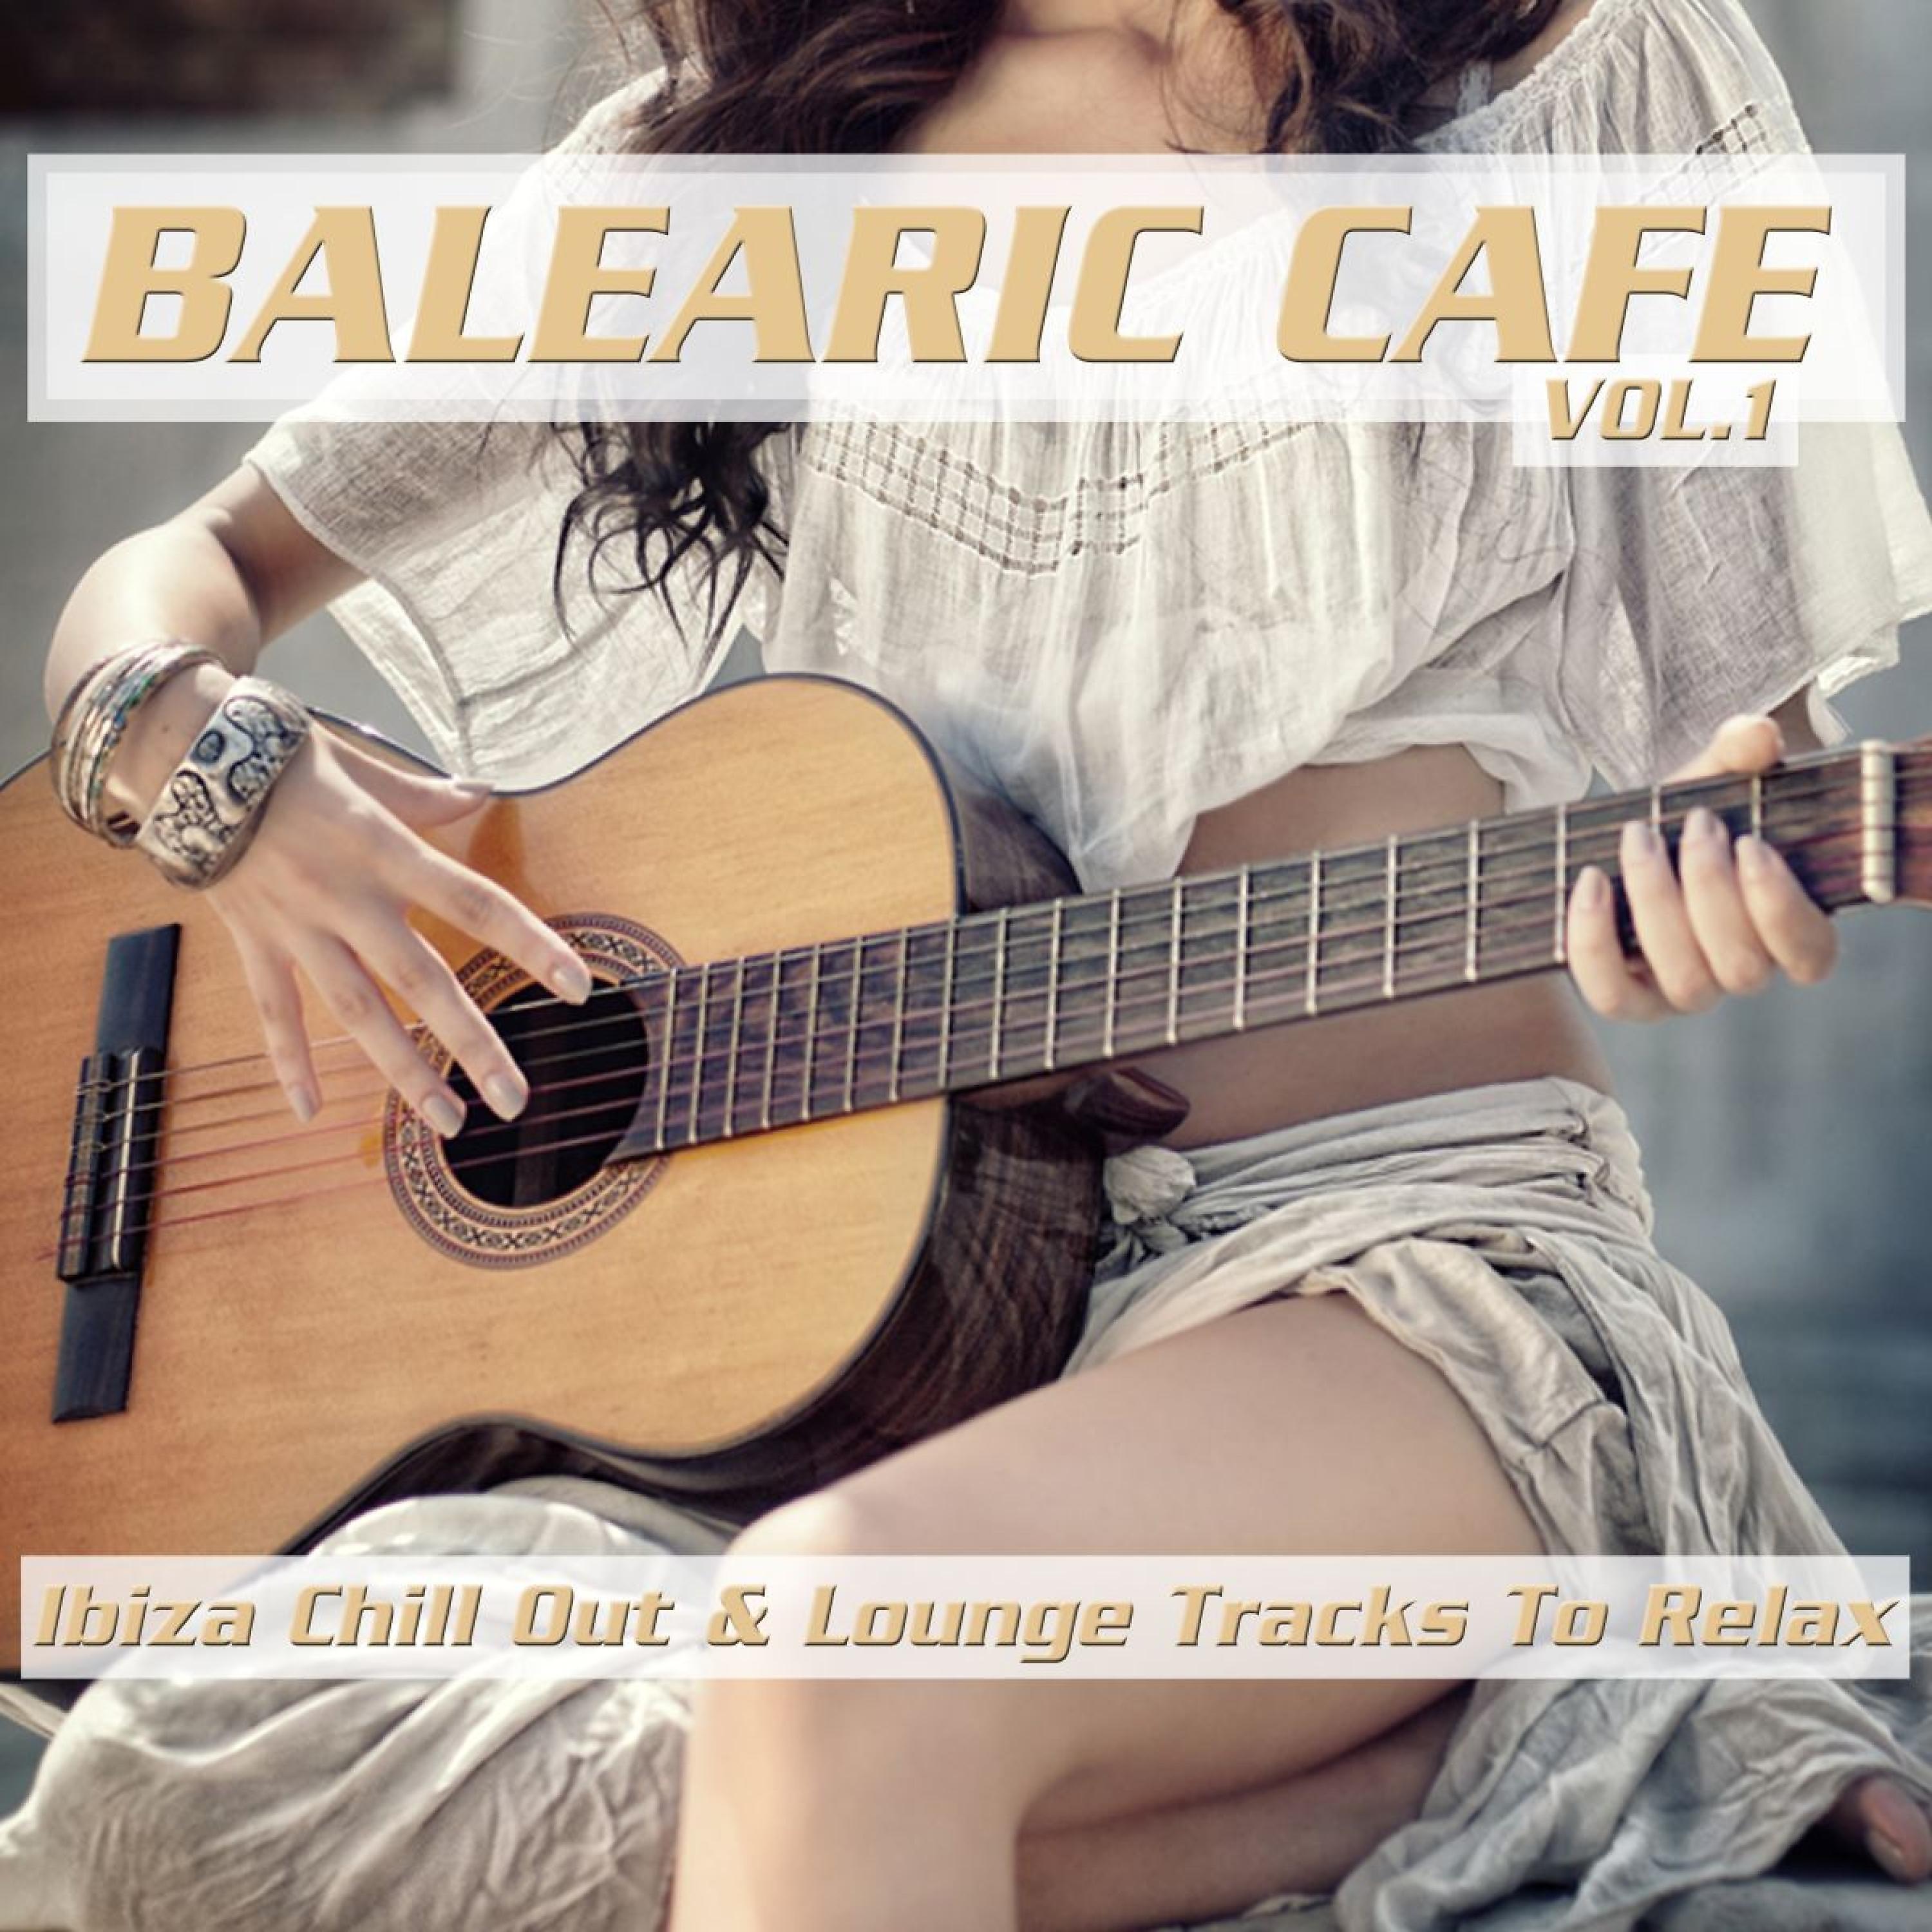 Постер альбома Balearic Cafe, Vol. 1 (Ibiza Chill Out & Lounge Tracks to Relax)